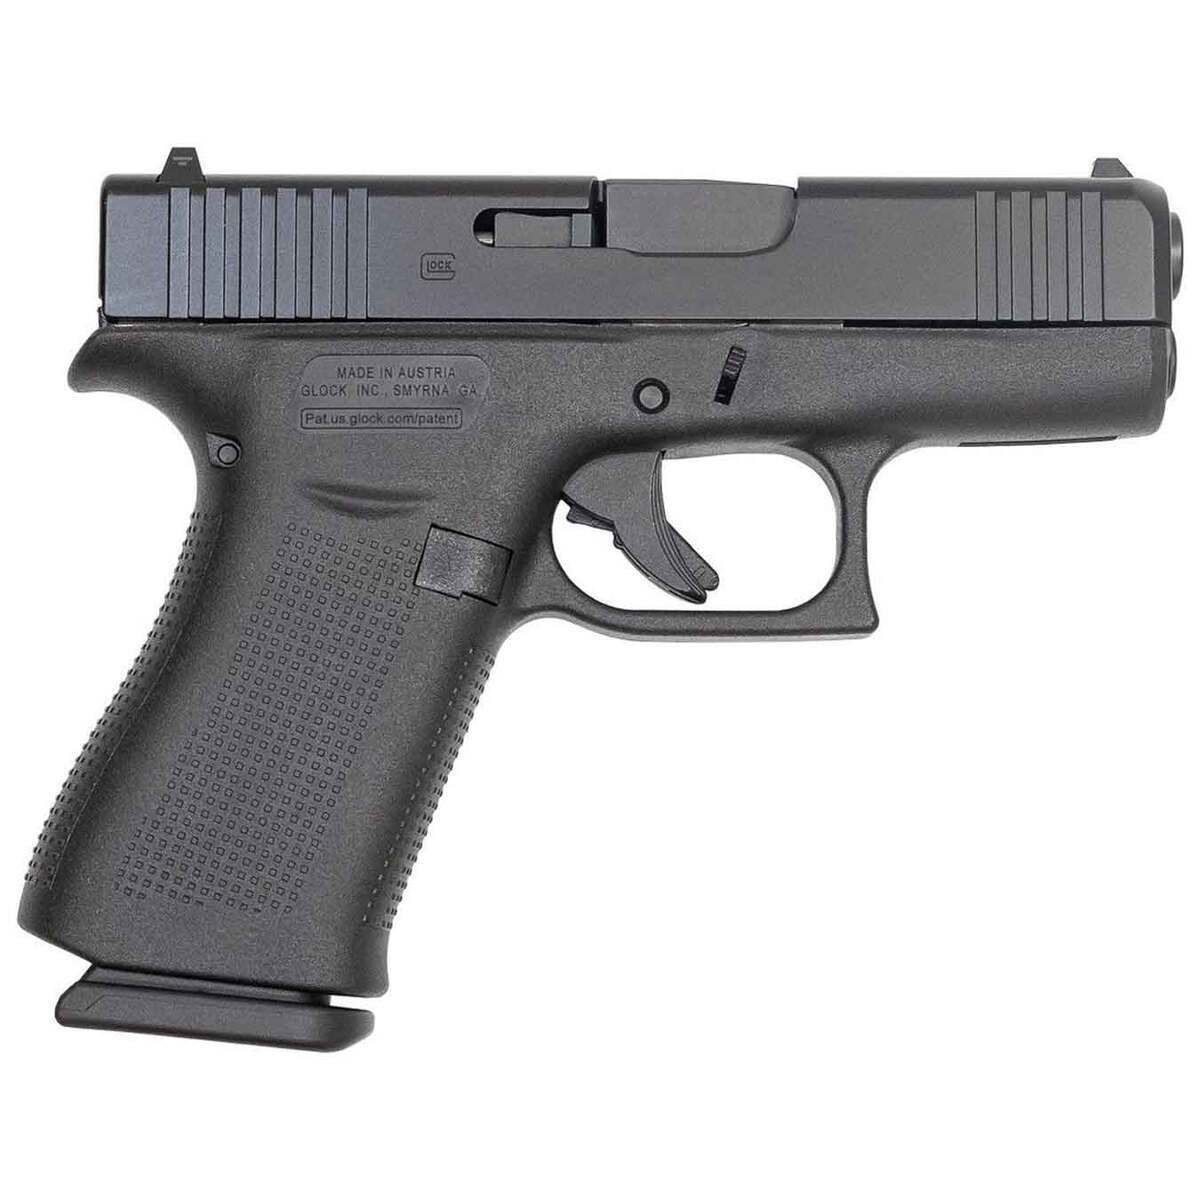 Glock 43X 9mm Luger 3.41in Black Pistol - 10+1 Rounds